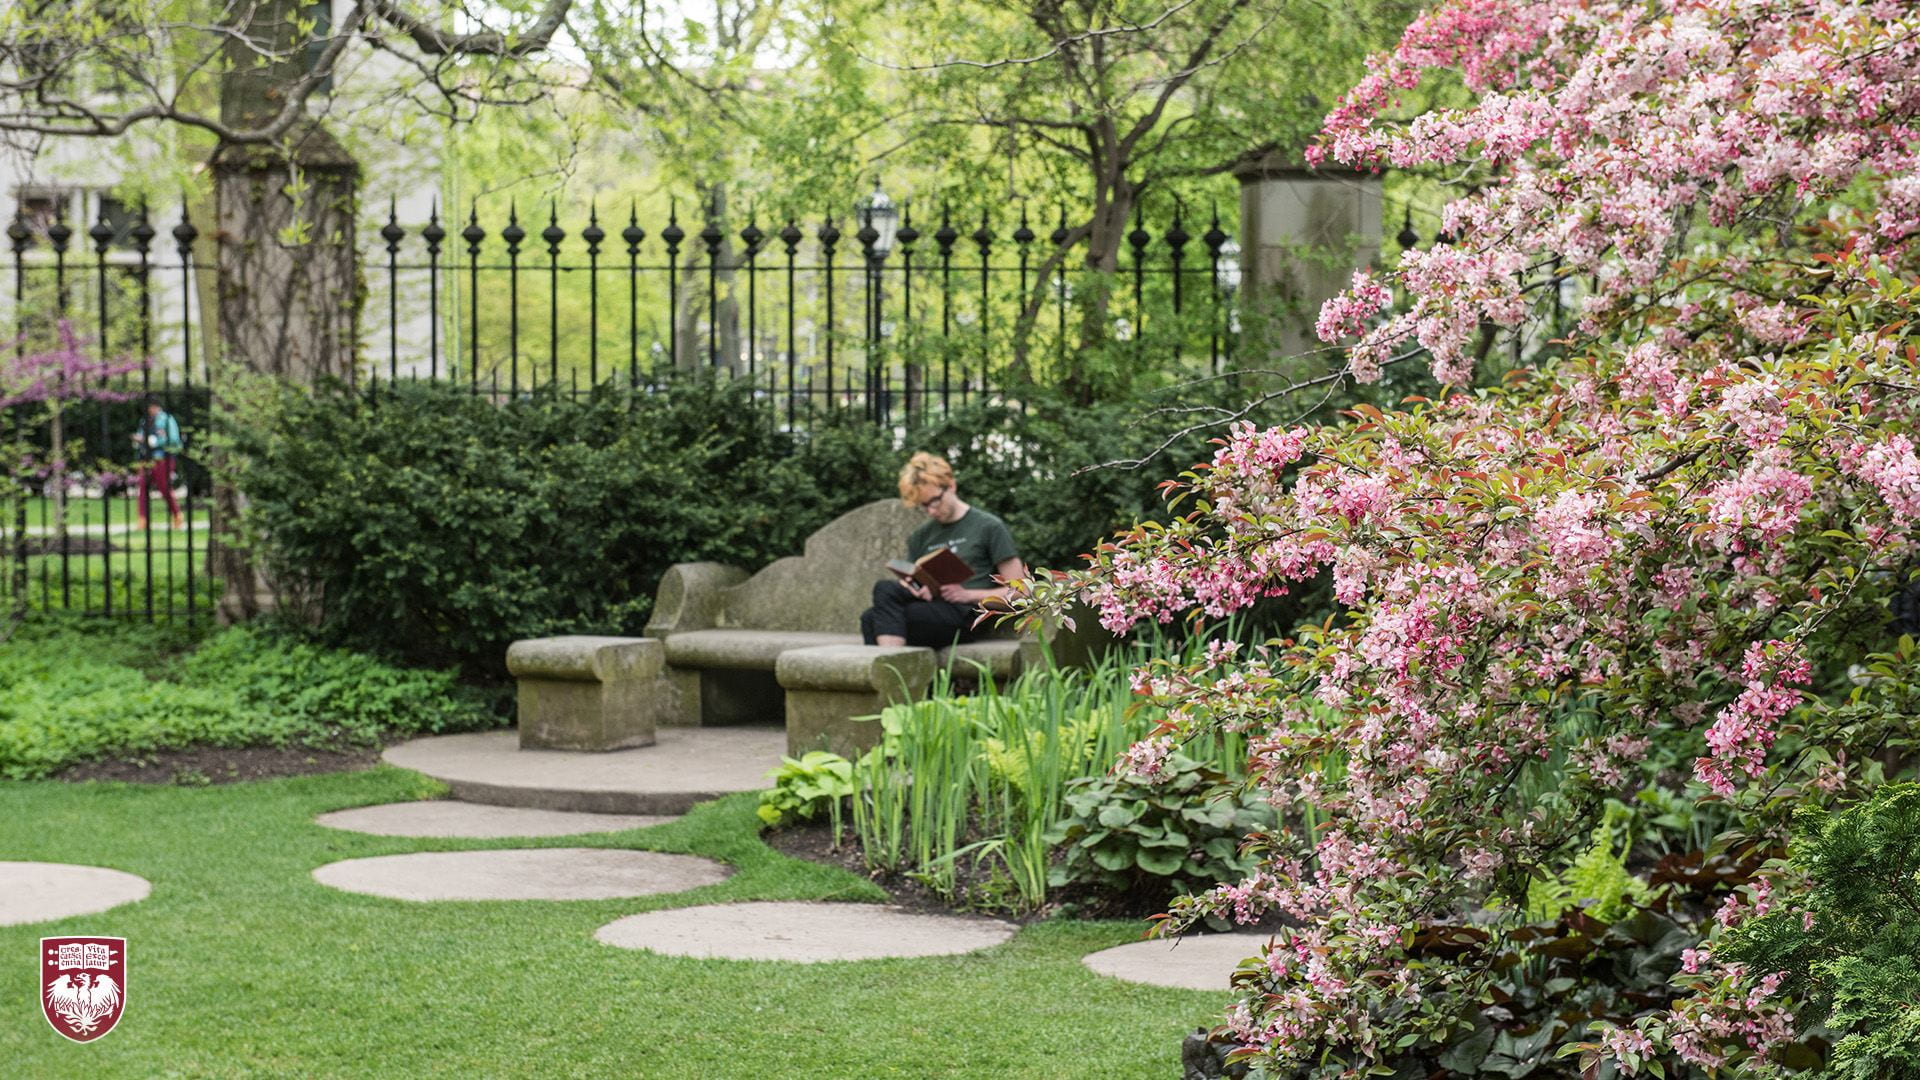 Student reading on a stone bench in a garden with pink blooms on a bush in the foreground